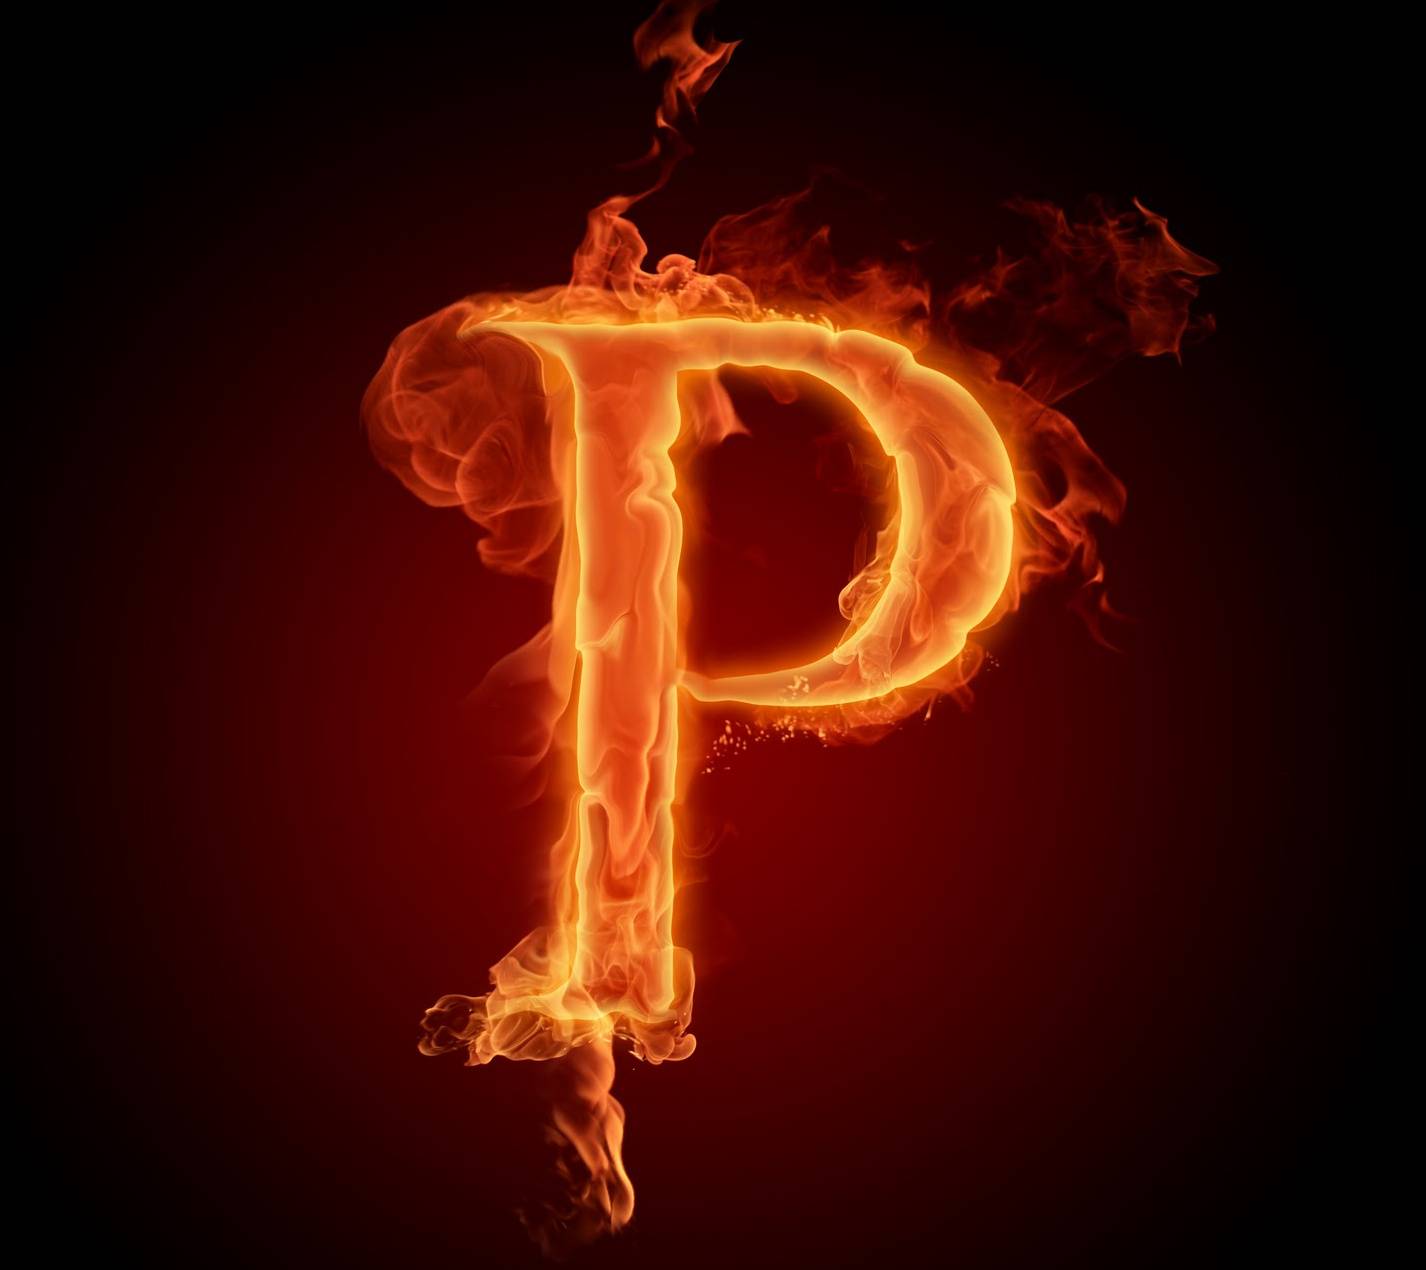 Download free p letter wallpaper for your mobile phone